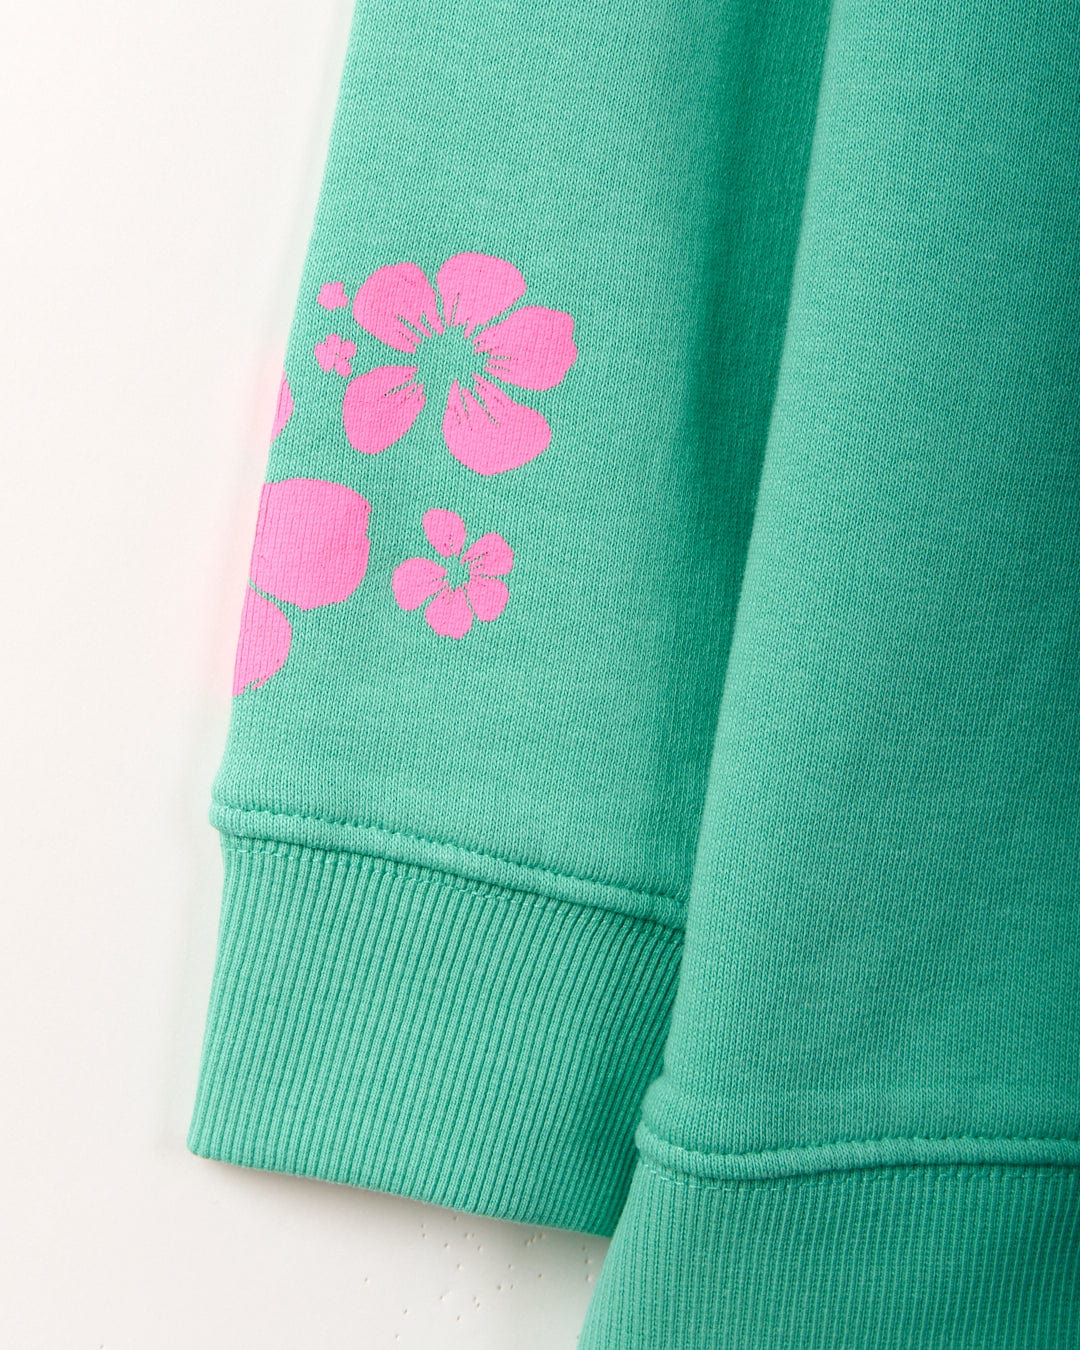 Close-up of a green sweatshirt sleeve with pink floral designs near the cuff, showcasing Saltrock branding. This 100% cotton piece, Tropic - Womens Sweat - Green, is machine washable for easy care.